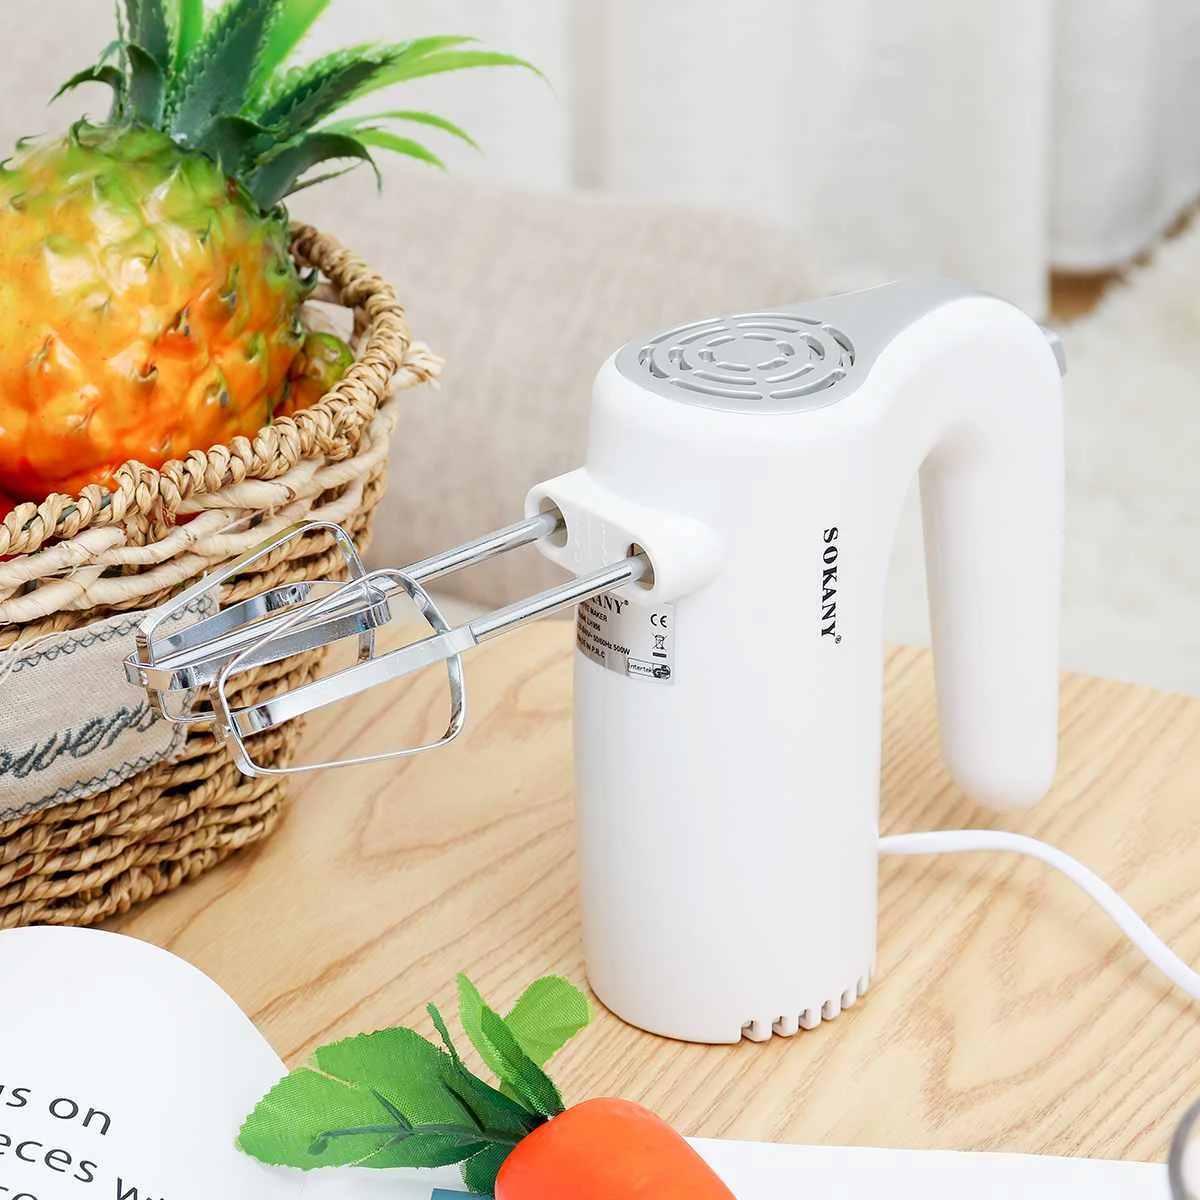 

500W&180W Power Electric Food Mixer Hand Blender 5 Speeds Dough Blender Egg Beater Food Processor Kitchen Manual Cooking Tools